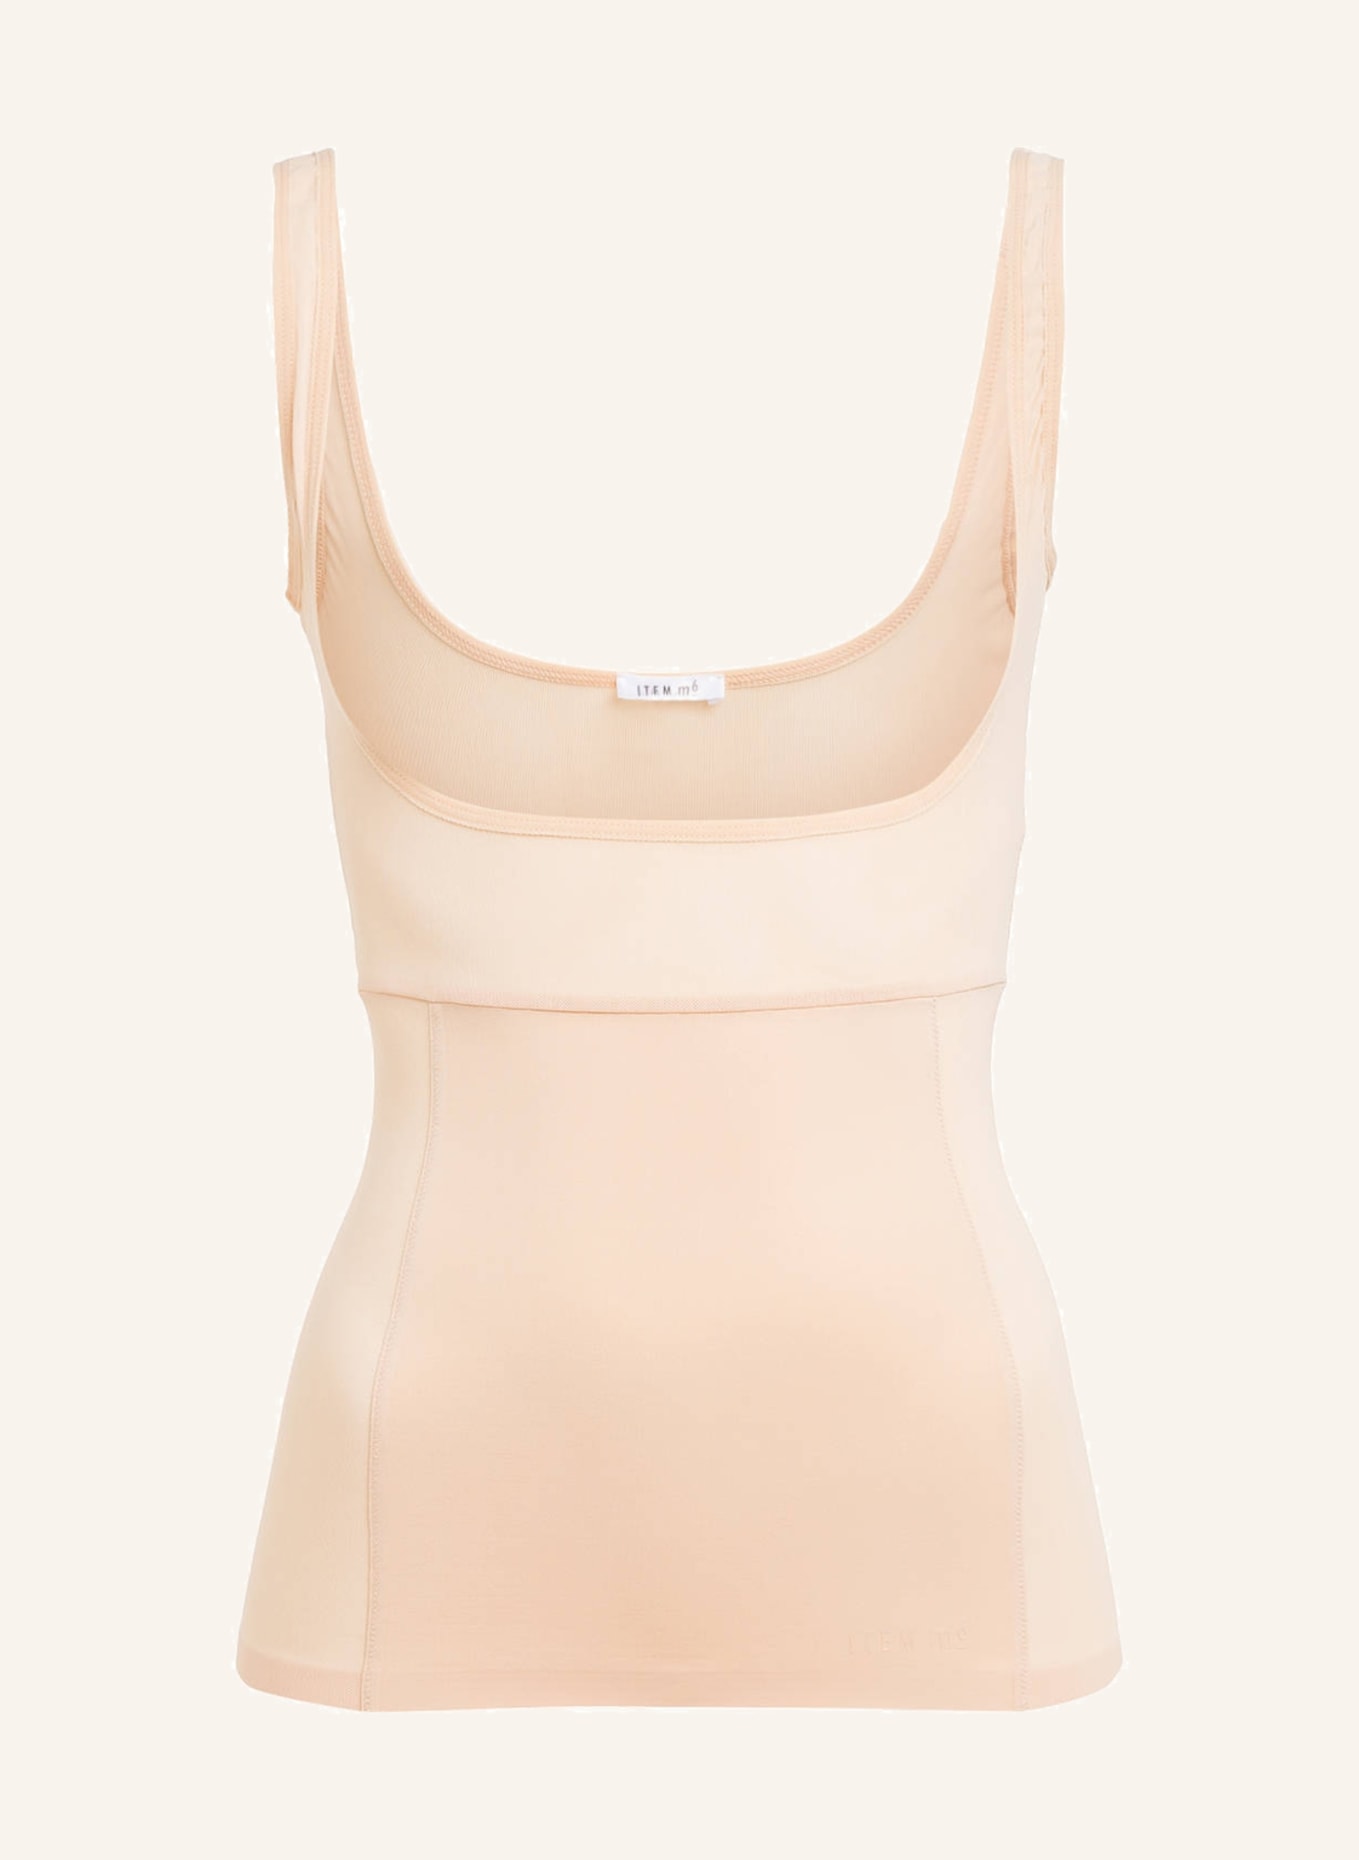 ITEM m6 Shaping top OPEN BUST , Color: NUDE (Image 1)